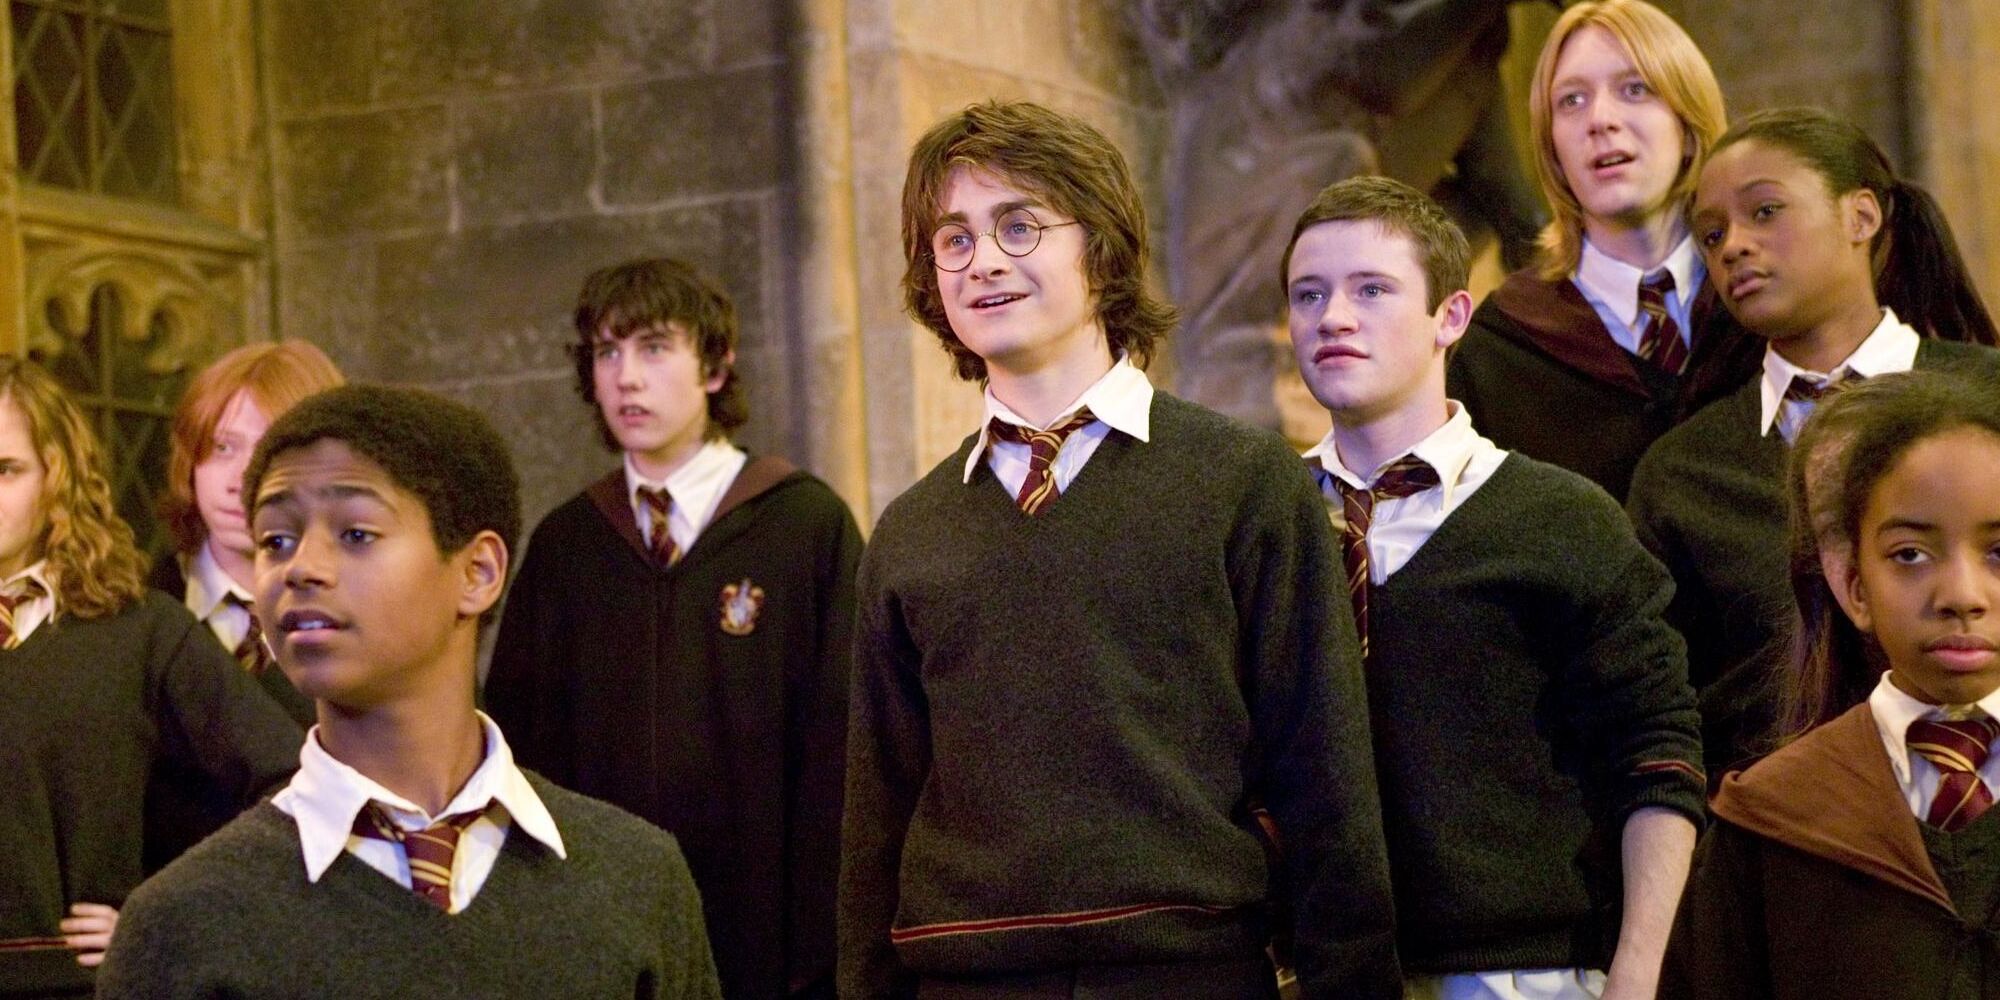 Harry Potter standing with other members of Gryffindor